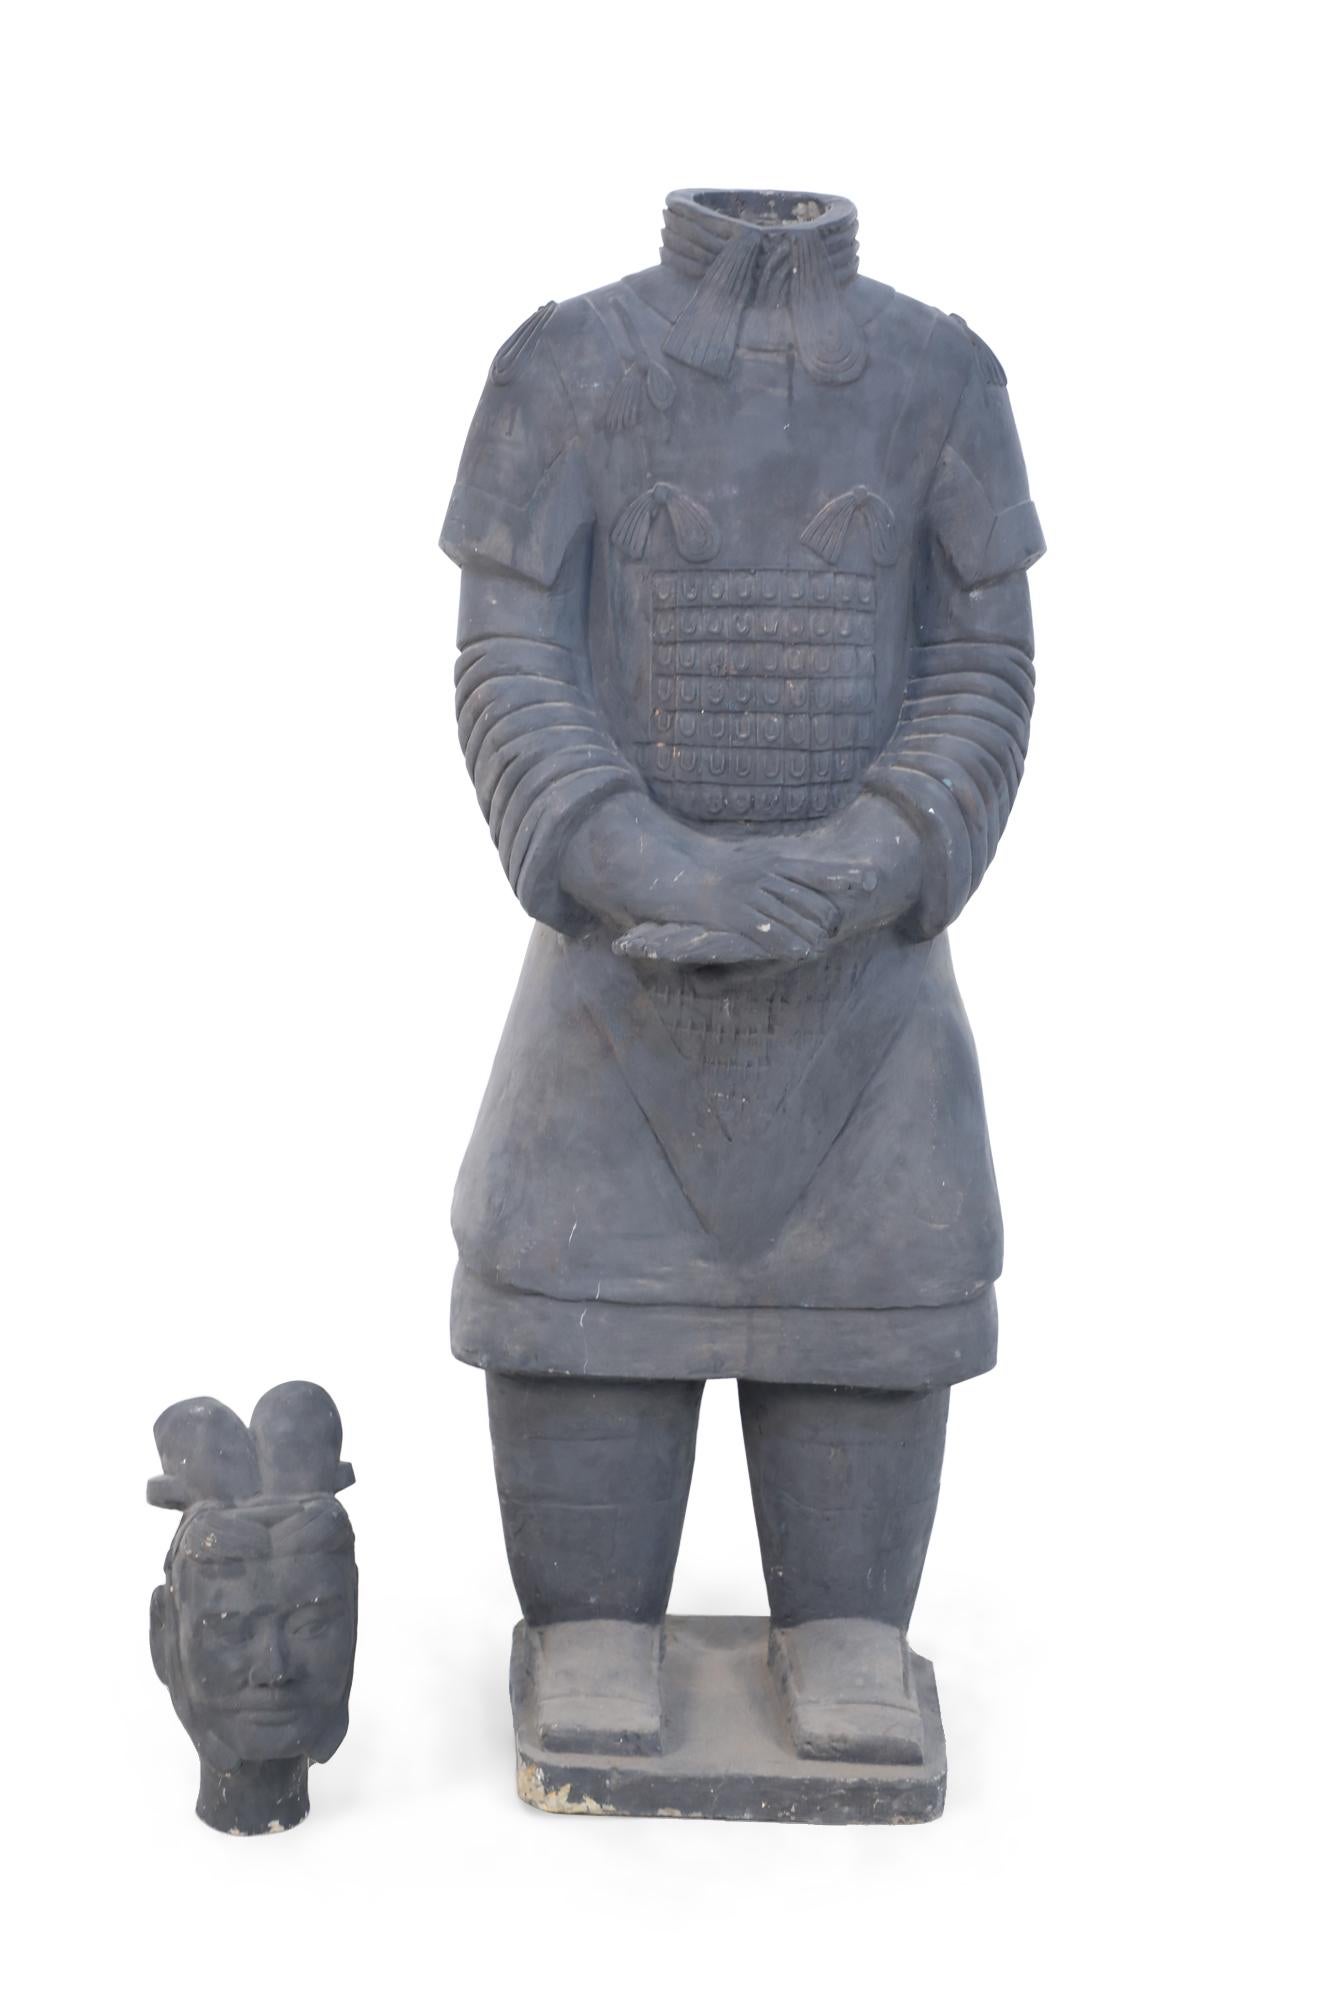 Chinese Qin Dynasty Style Life-Size Terracotta Soldier Statue 12